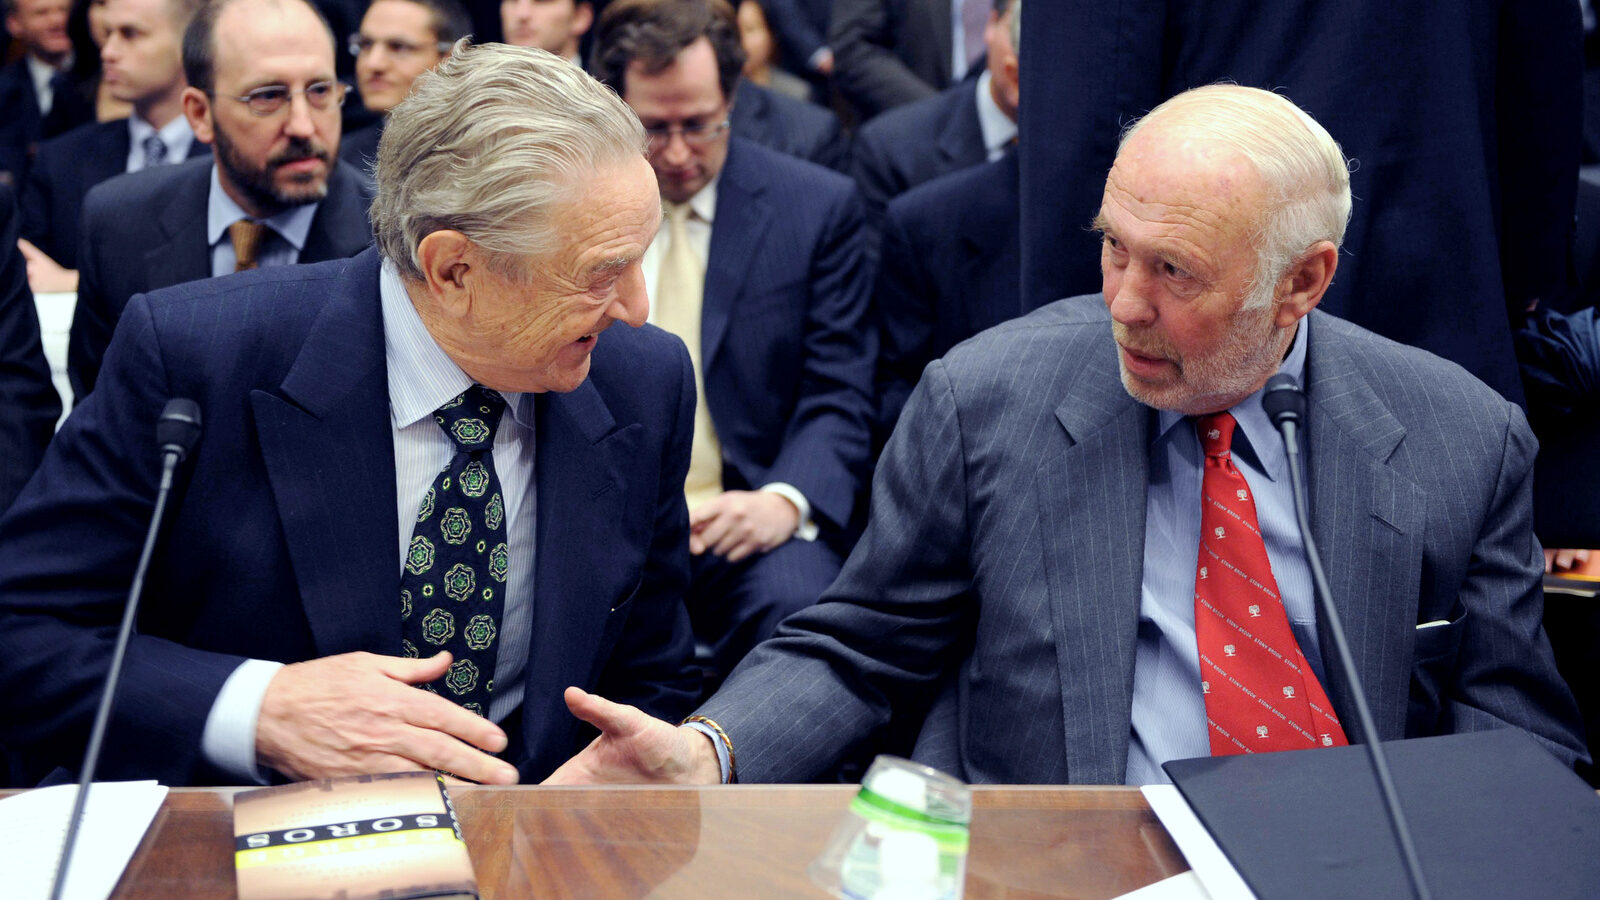 Soros Fund Management chairman George Soros, left, shakes hands with Renaissance Technologies President James Simons on Capitol Hill in Washington, Thursday, Nov. 13, 2008, prior to testifying before the House Oversight and Government Reform Committee hearing on "Hedge Funds and the Financial Market". (AP/Kevin Wolf)